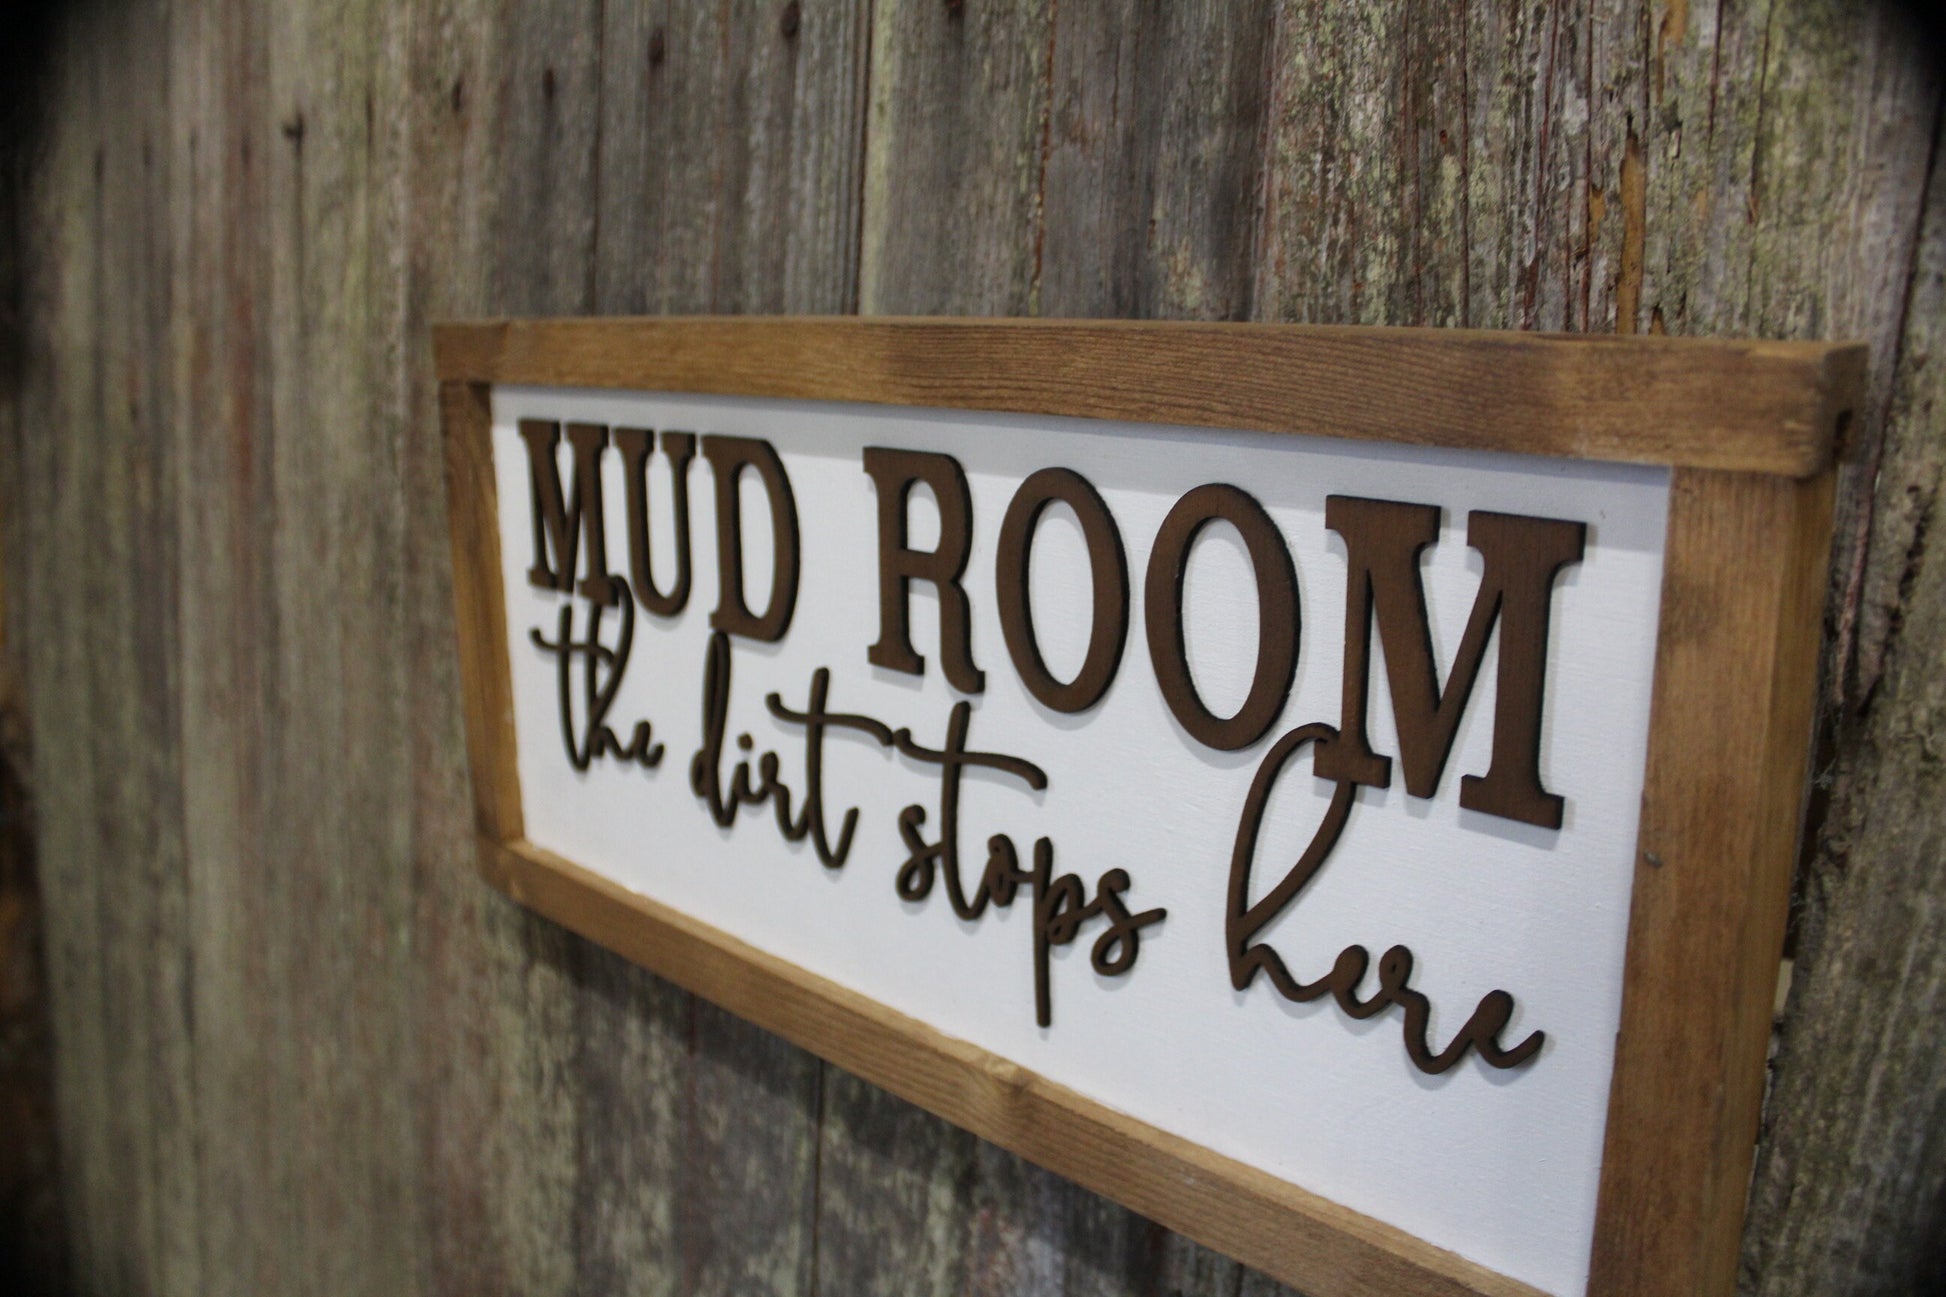 Mud Room Sign The Mud Stops Here Wood Sign Funny 3D Raised Text Decoration Wall Hanging Farmhouse Rustic Primitive Silly Utility Laundry